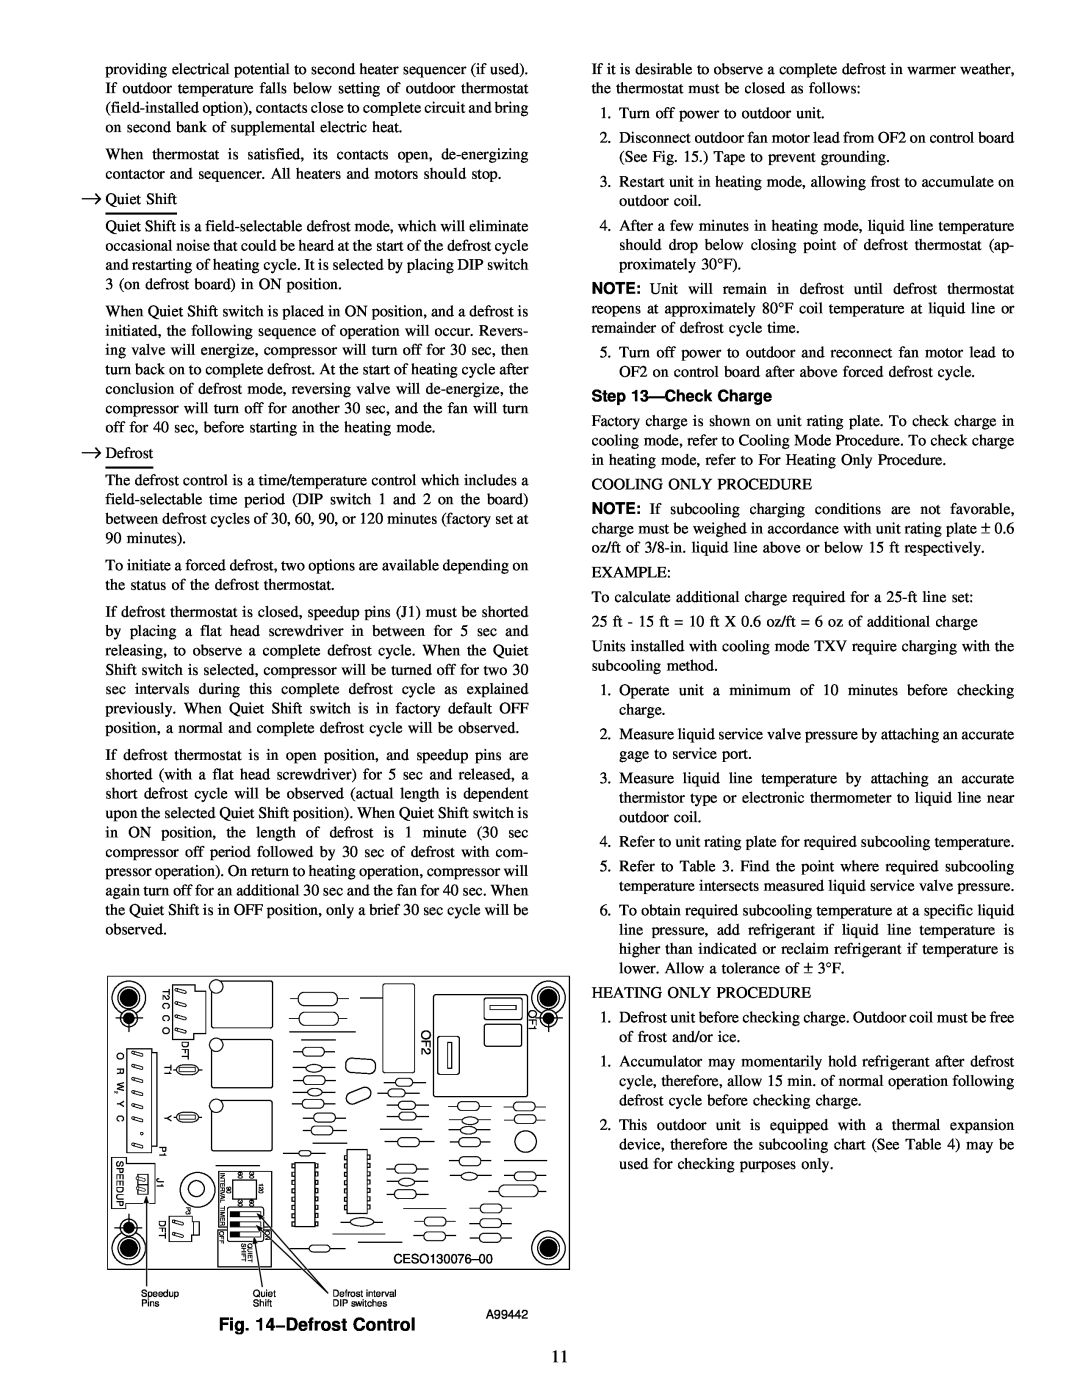 Carrier 38YSA instruction manual Defrost Control, CheckCharge 